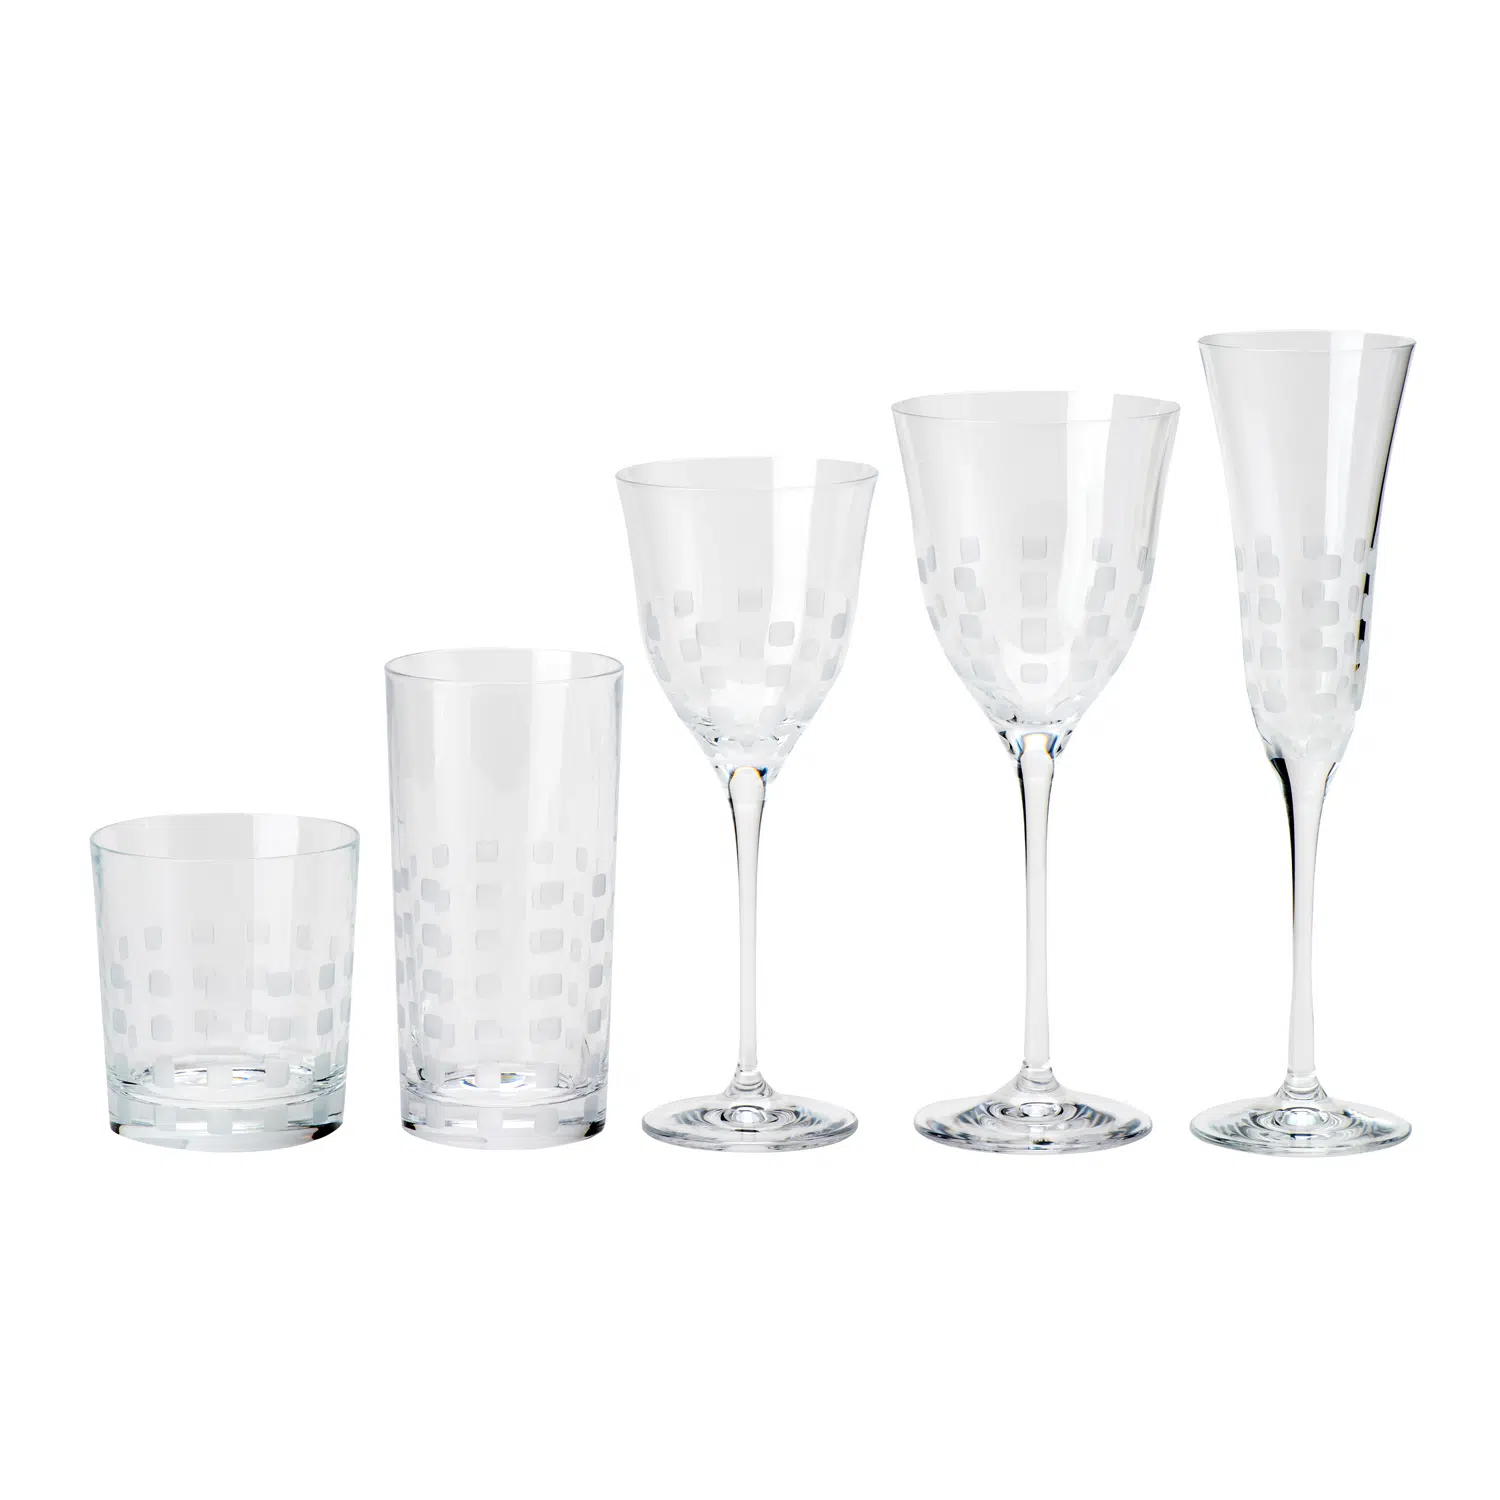 Jacques Luxury Fine Crystal Glassware